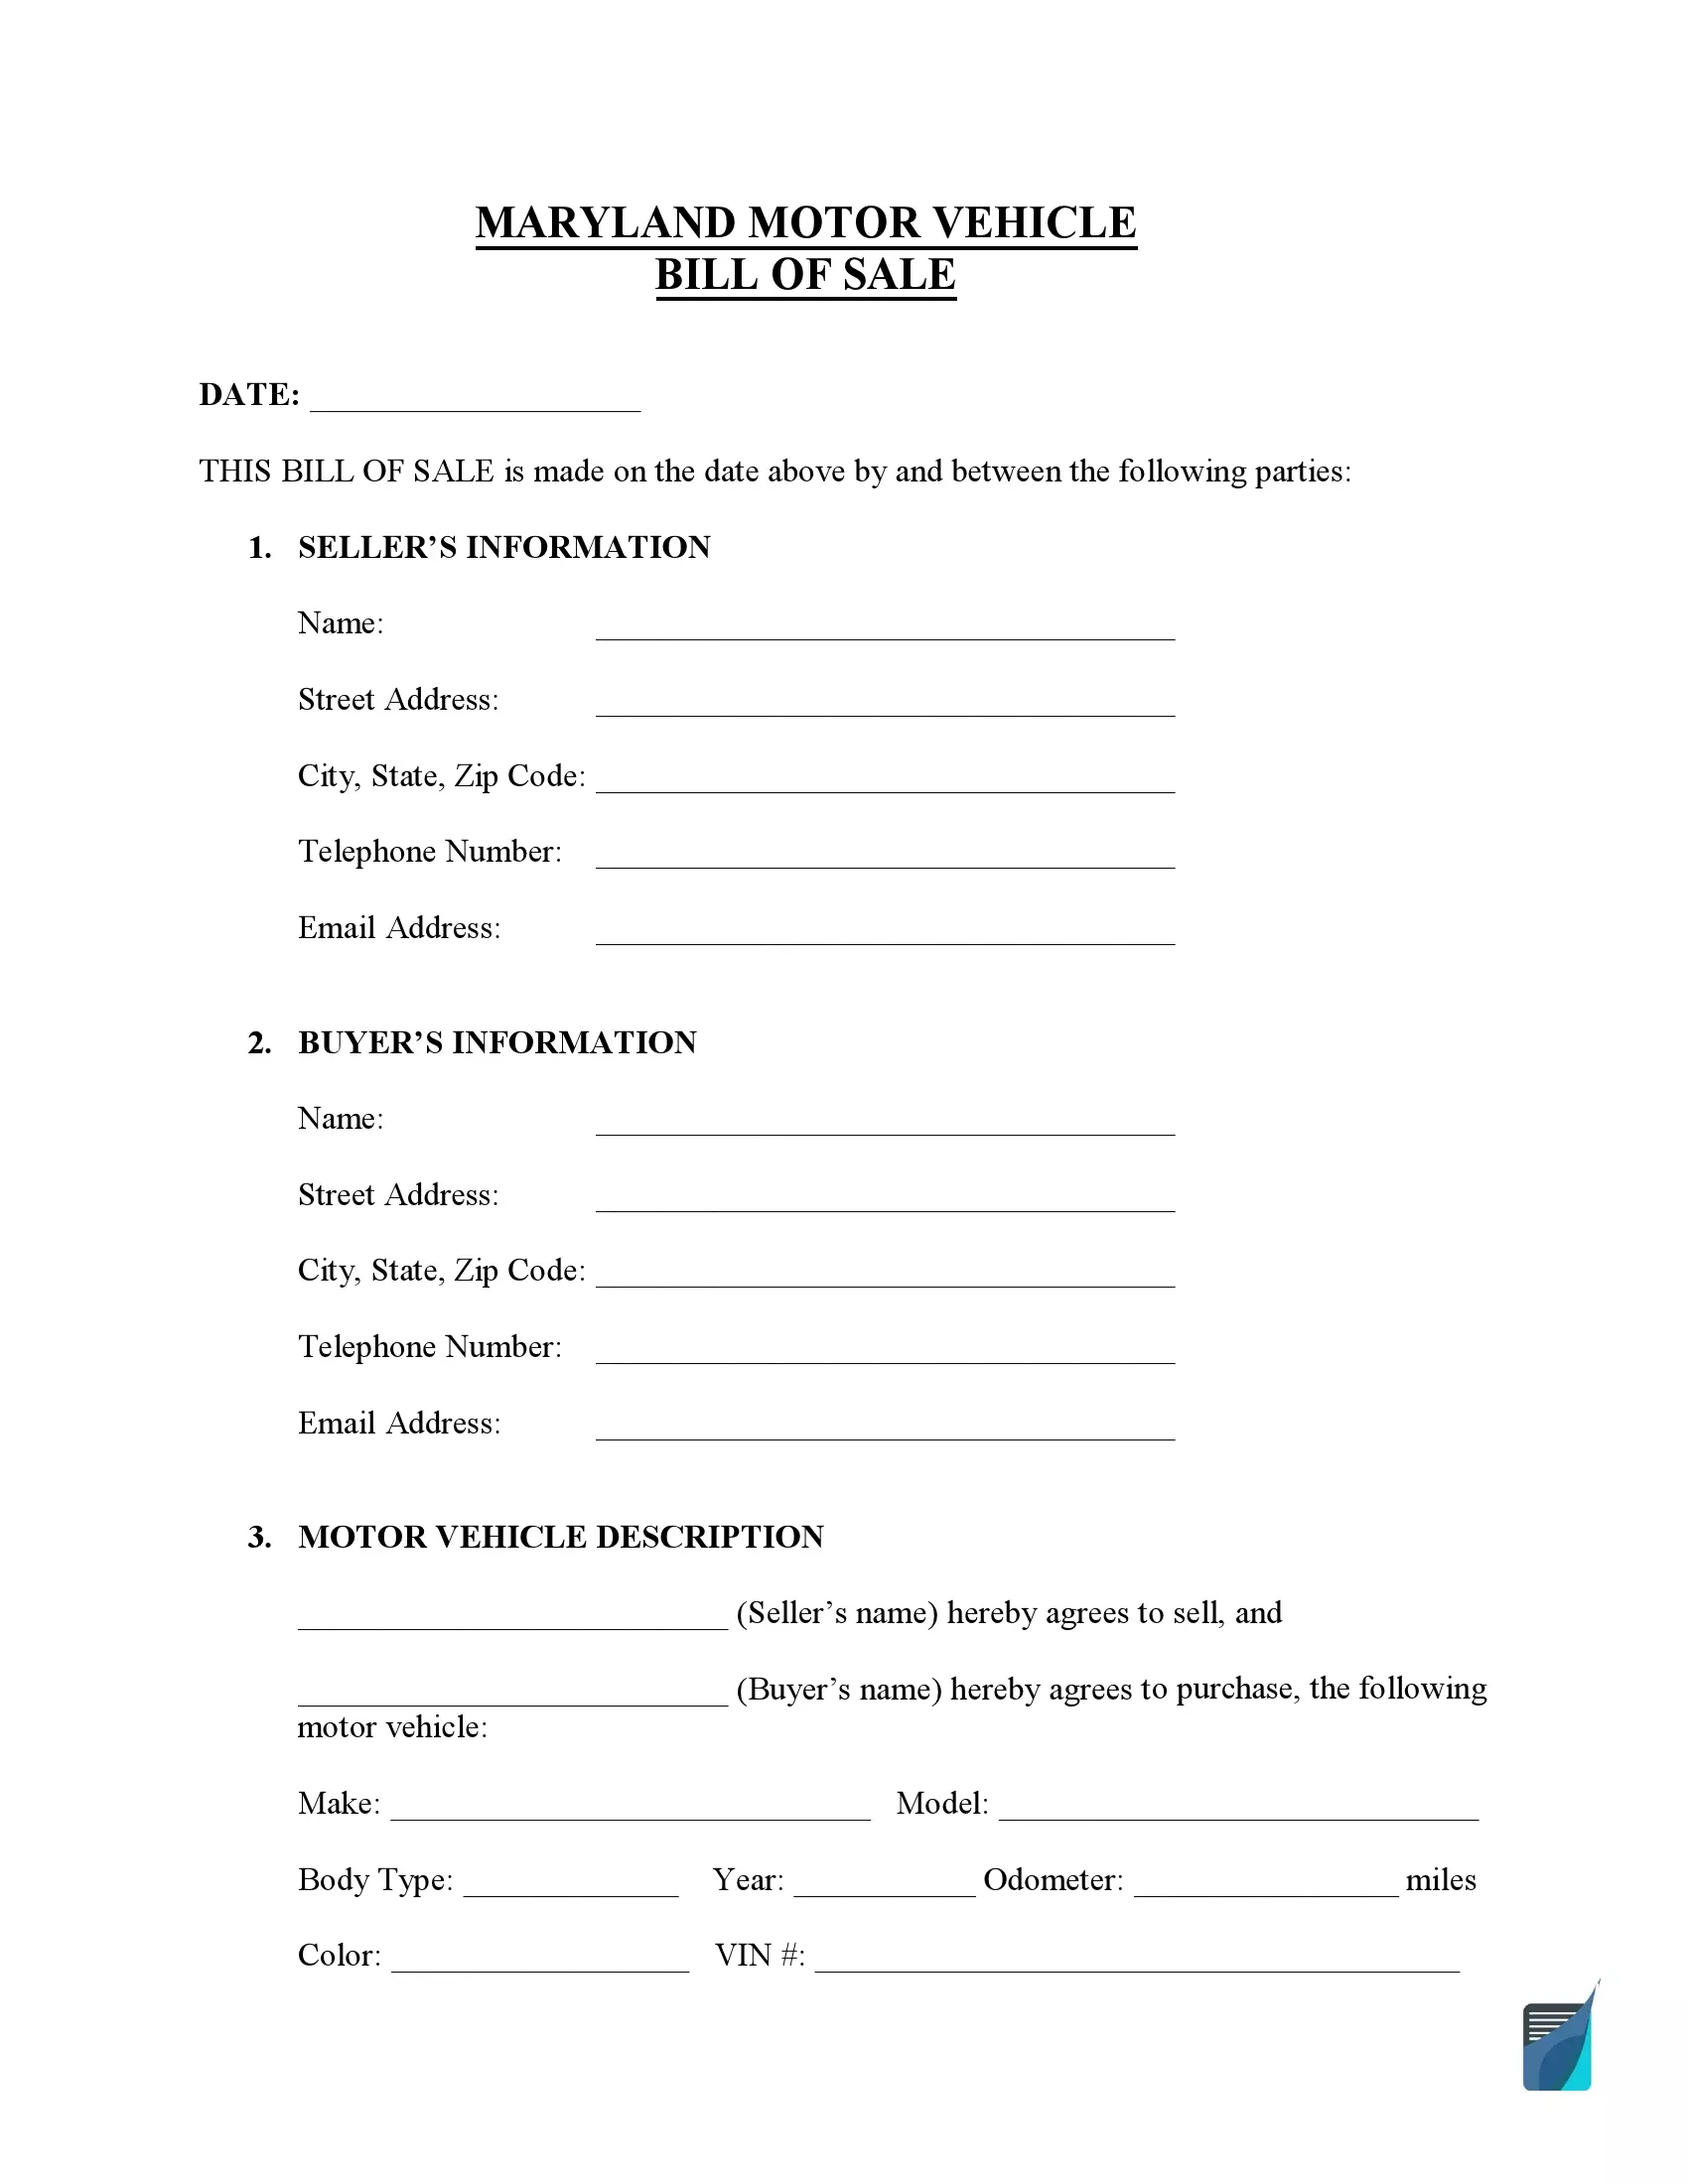 Maryland-motor-vehicle-bill-of-sale-template